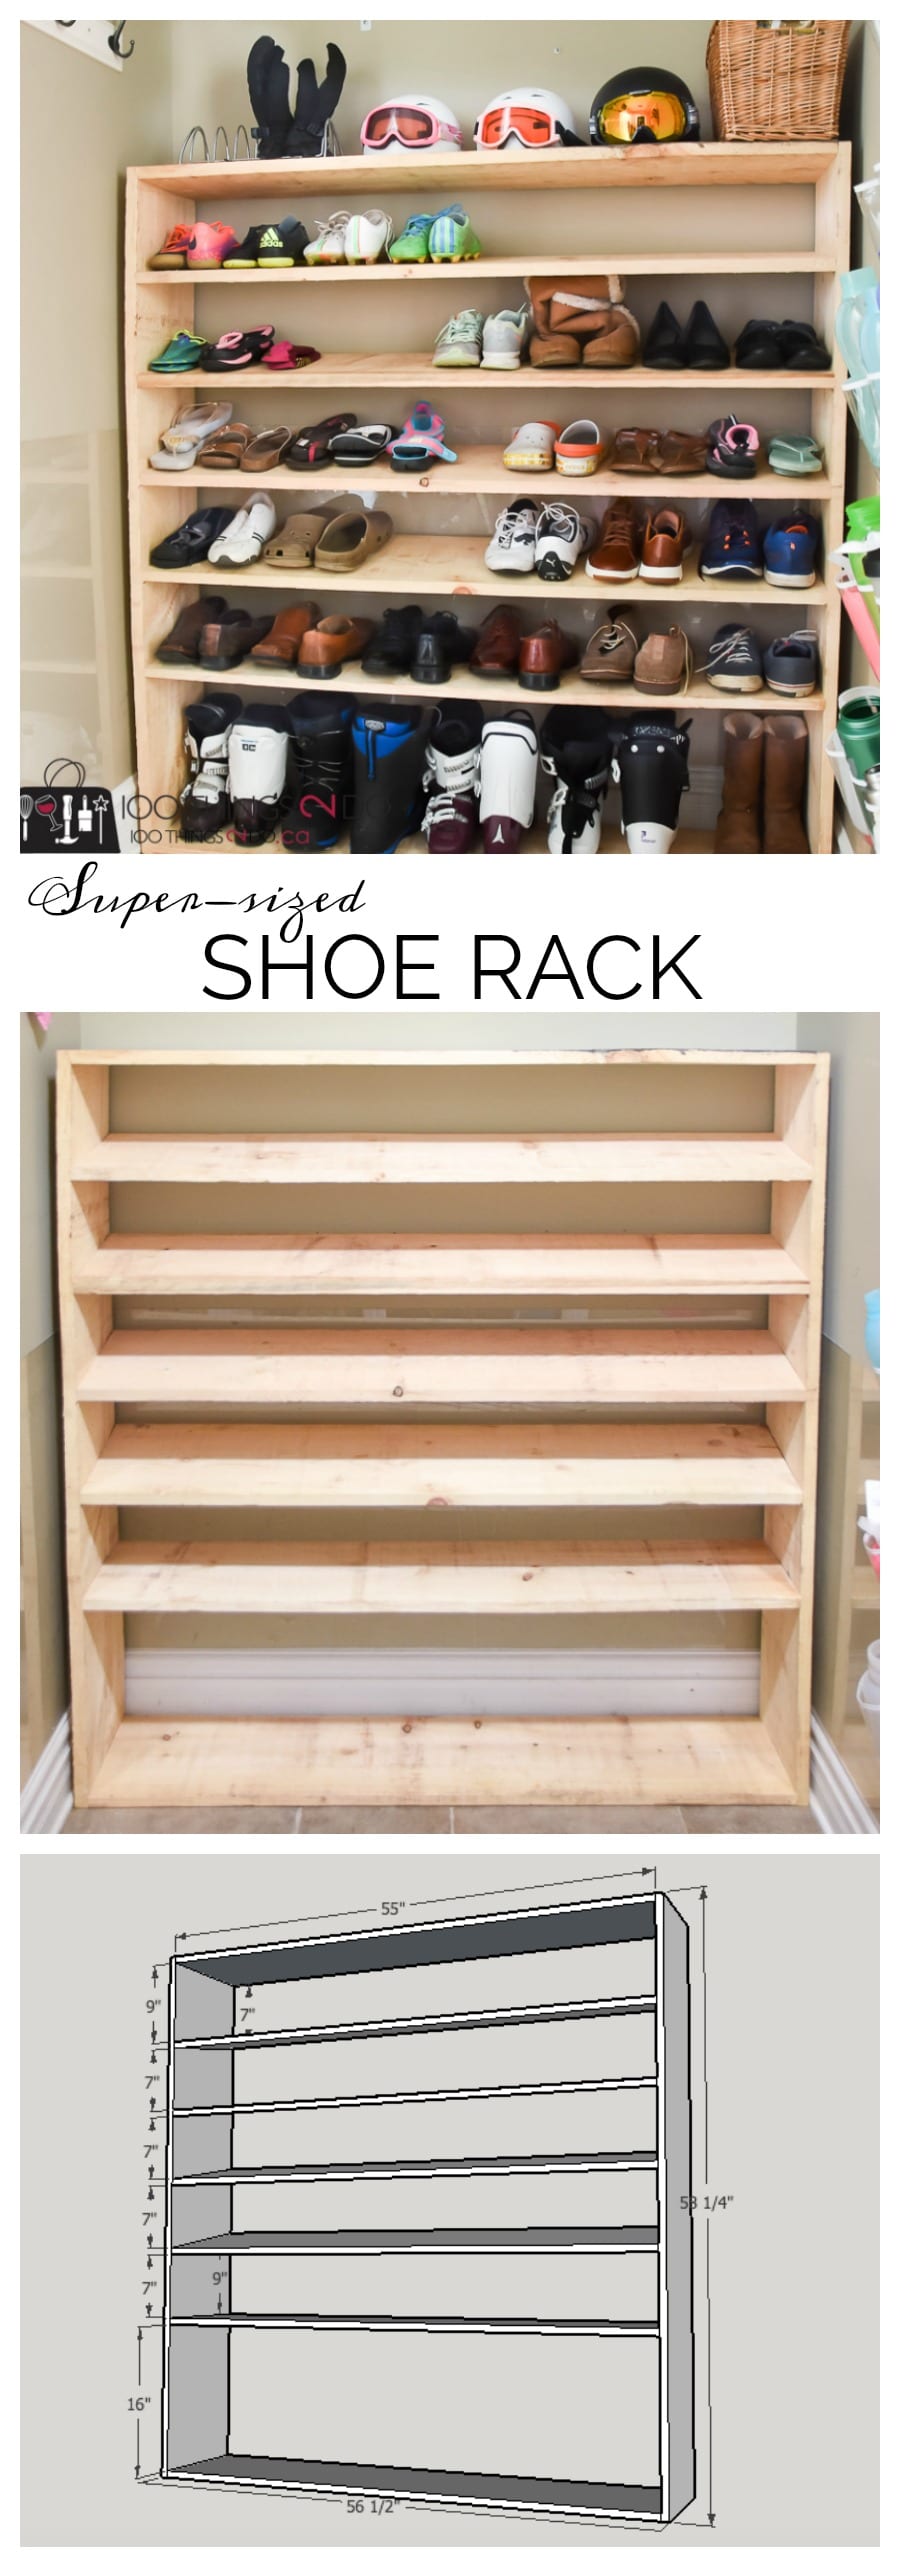 How To Make A Super Sized Shoe Rack On A Budget I have a little section in our closet that i hoard use, and no. how to make a super sized shoe rack on